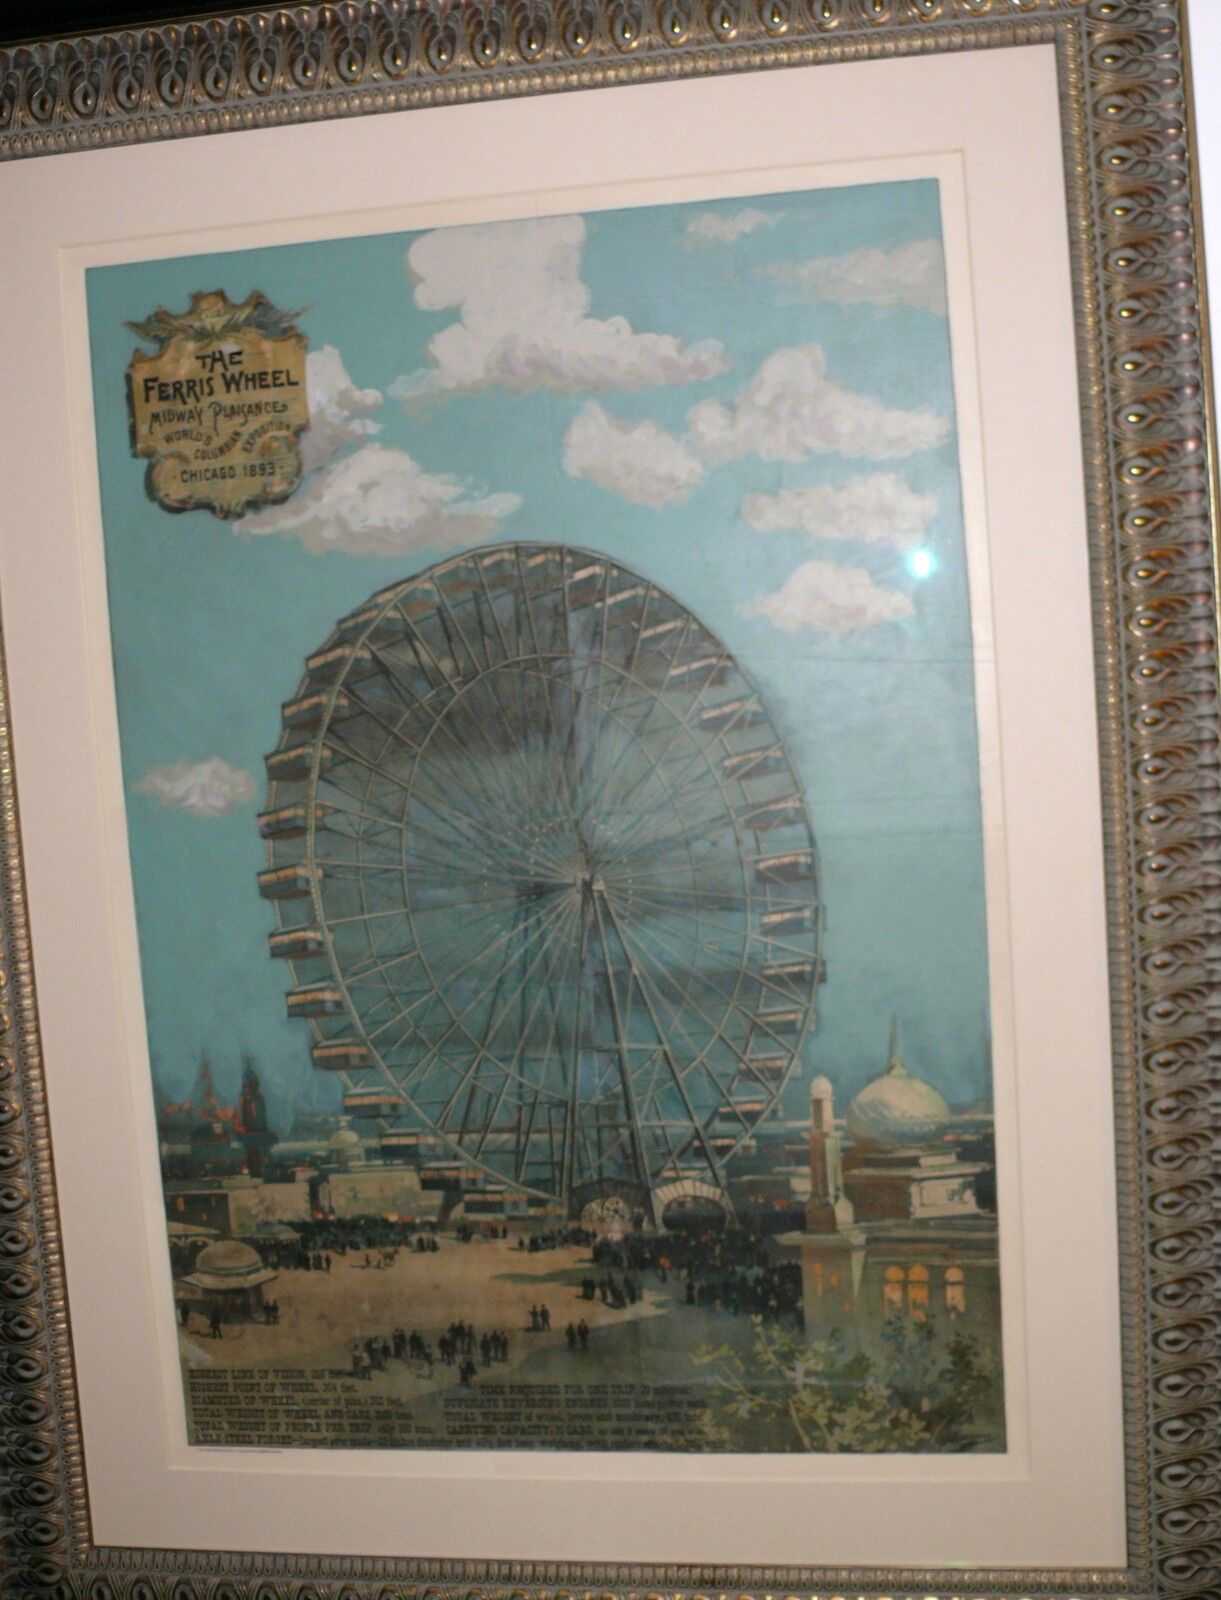 FERRIS WHEEL MIDWAY PLAISANCE WORLD'S COLUMBIAN EXPOSITION CHICAGO 1893 POSTER